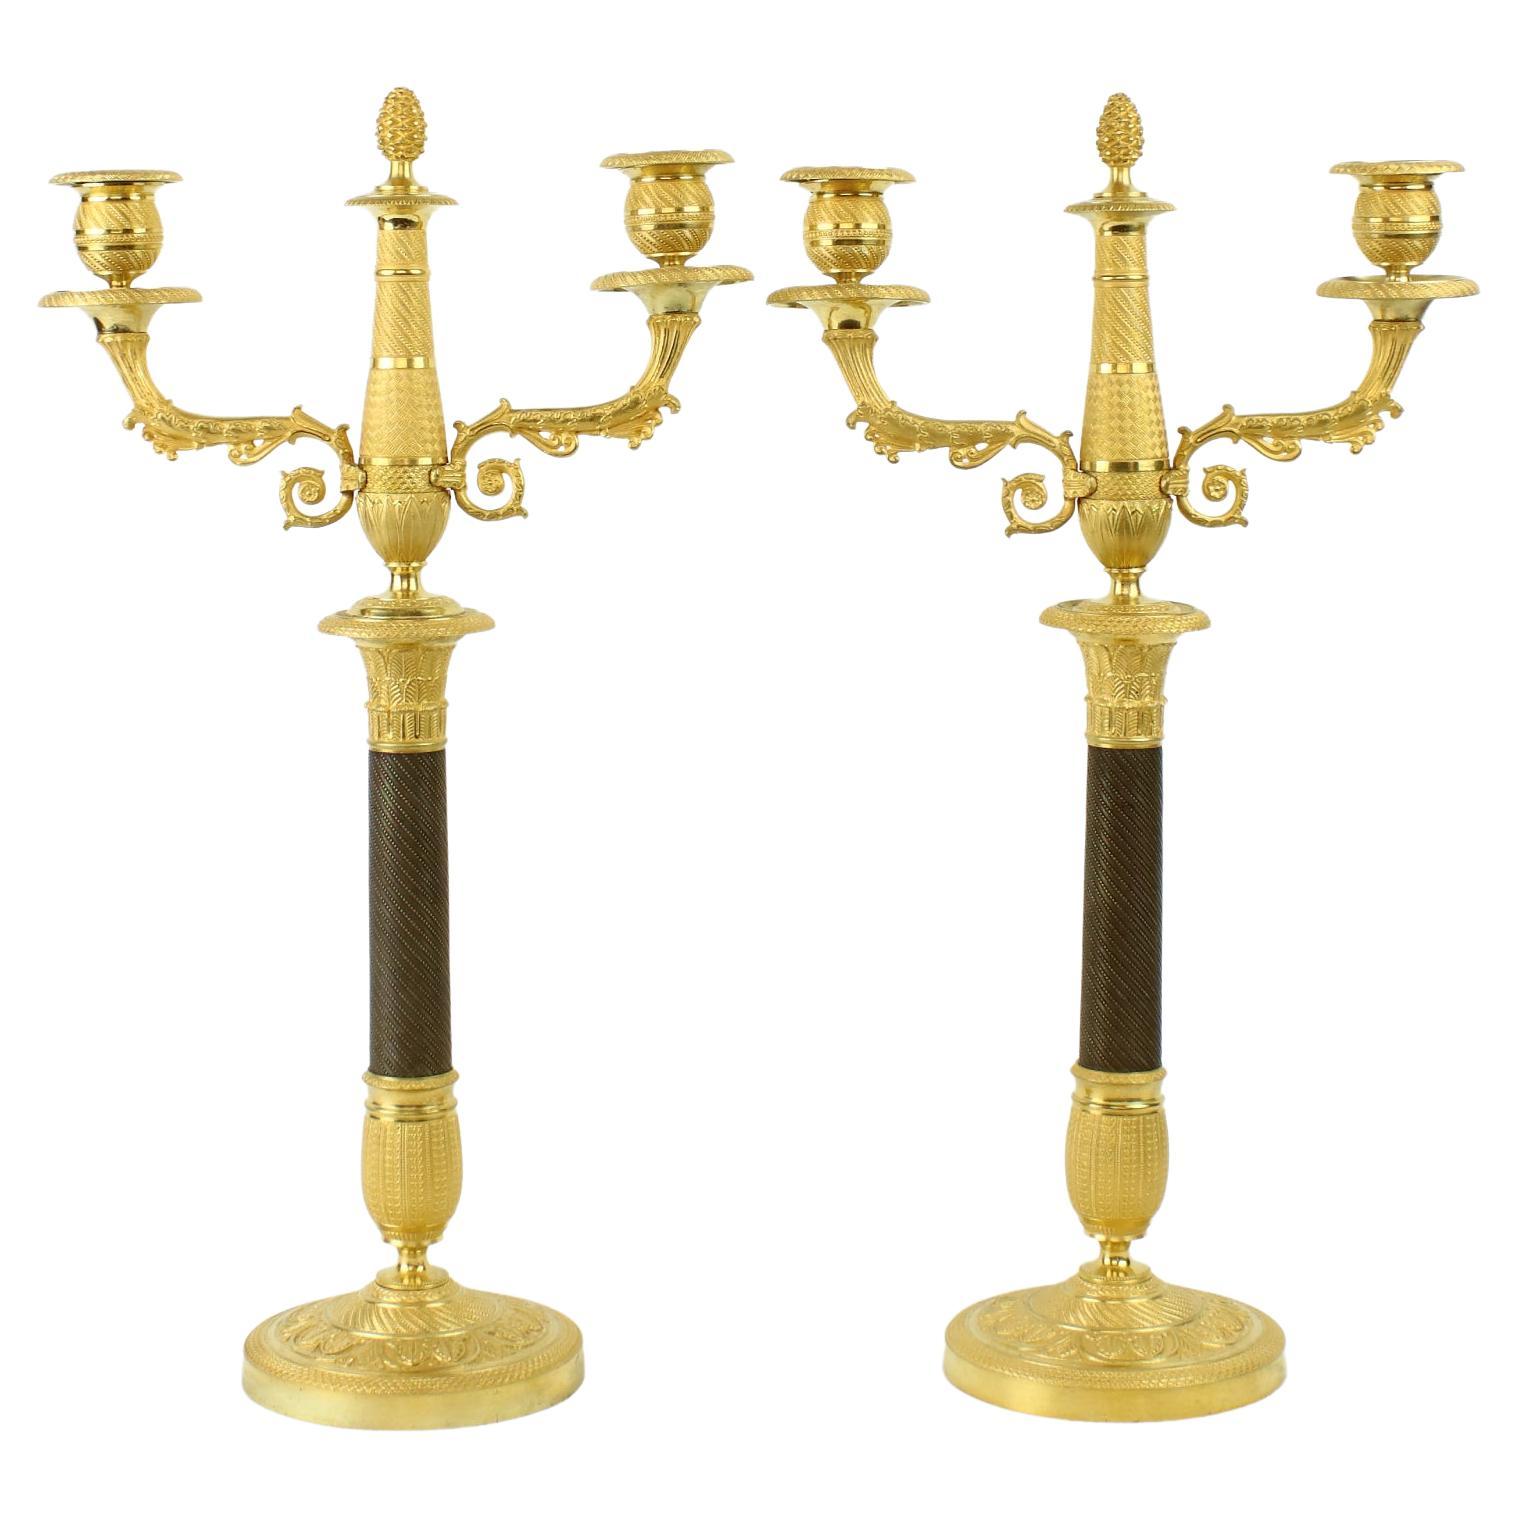 Pair of French Empire One-/Two-Light Patinated and Gilt Bronze Candelabra